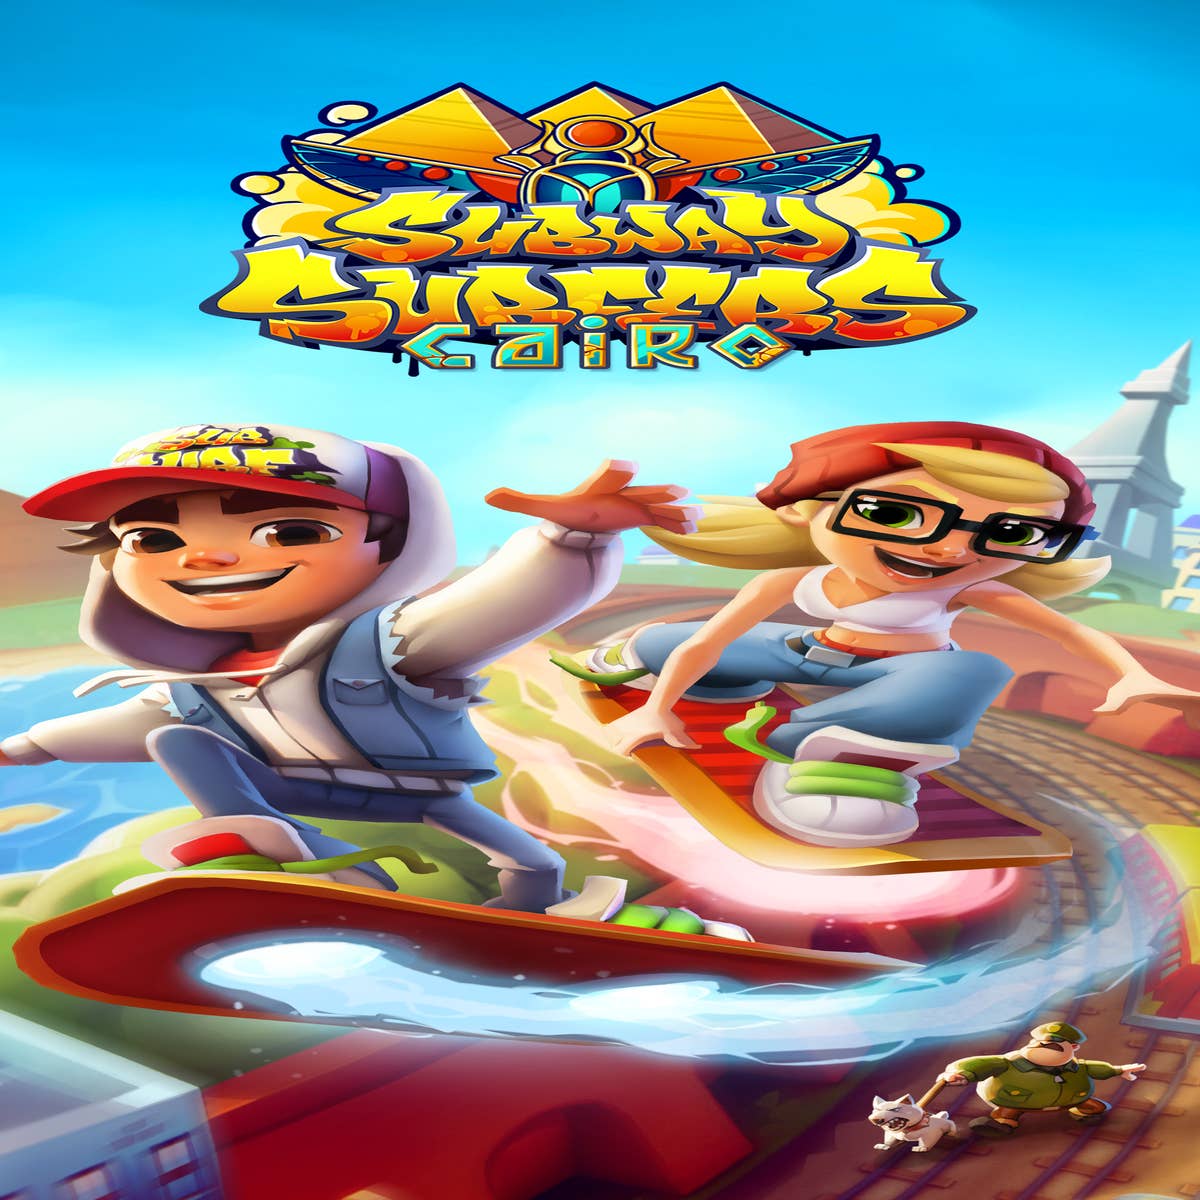 28 Subway surfers ideas  subway surfers, subway, subway surfers game